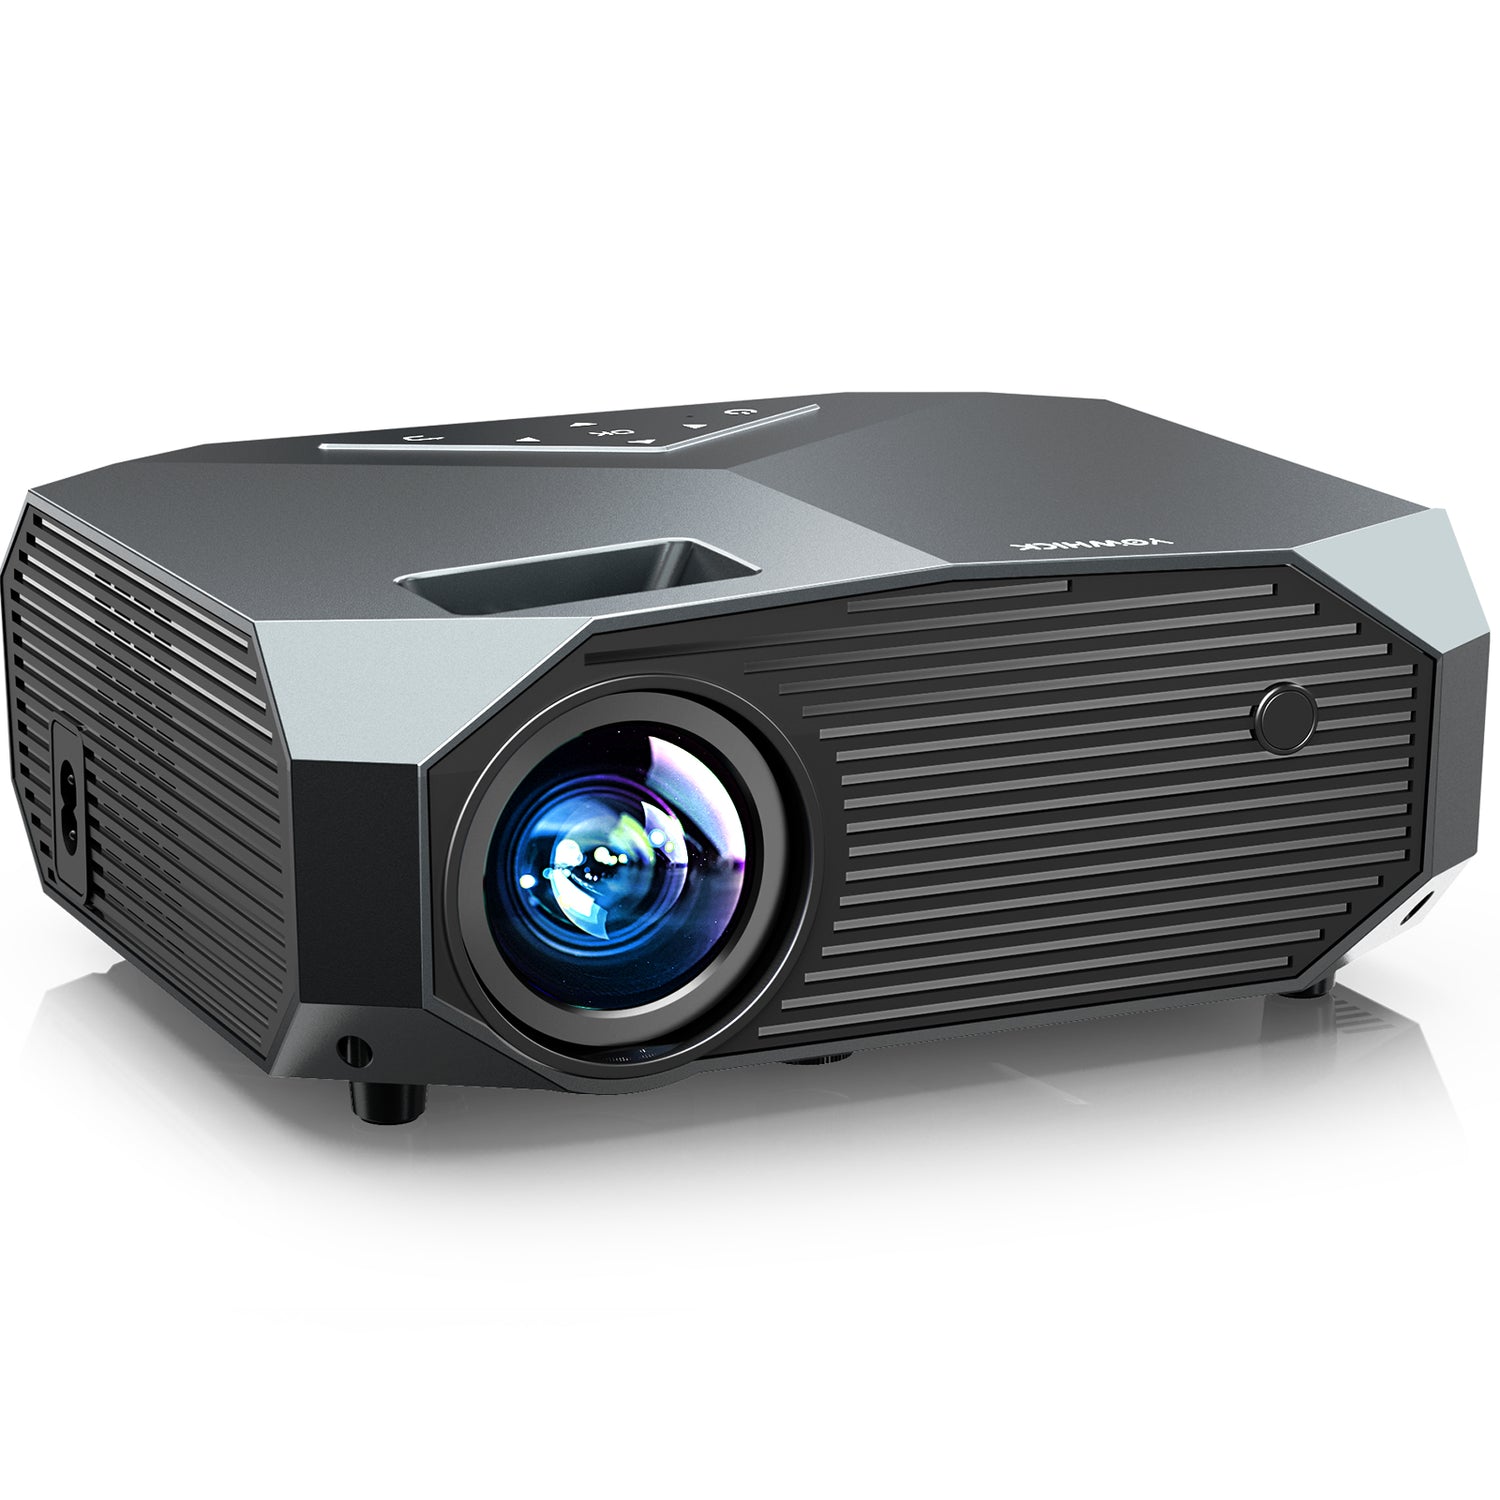 YOWHICK DP03 5G WiFi Projector Full HD 1080P Outdoor Portable Video  Projector - Grey